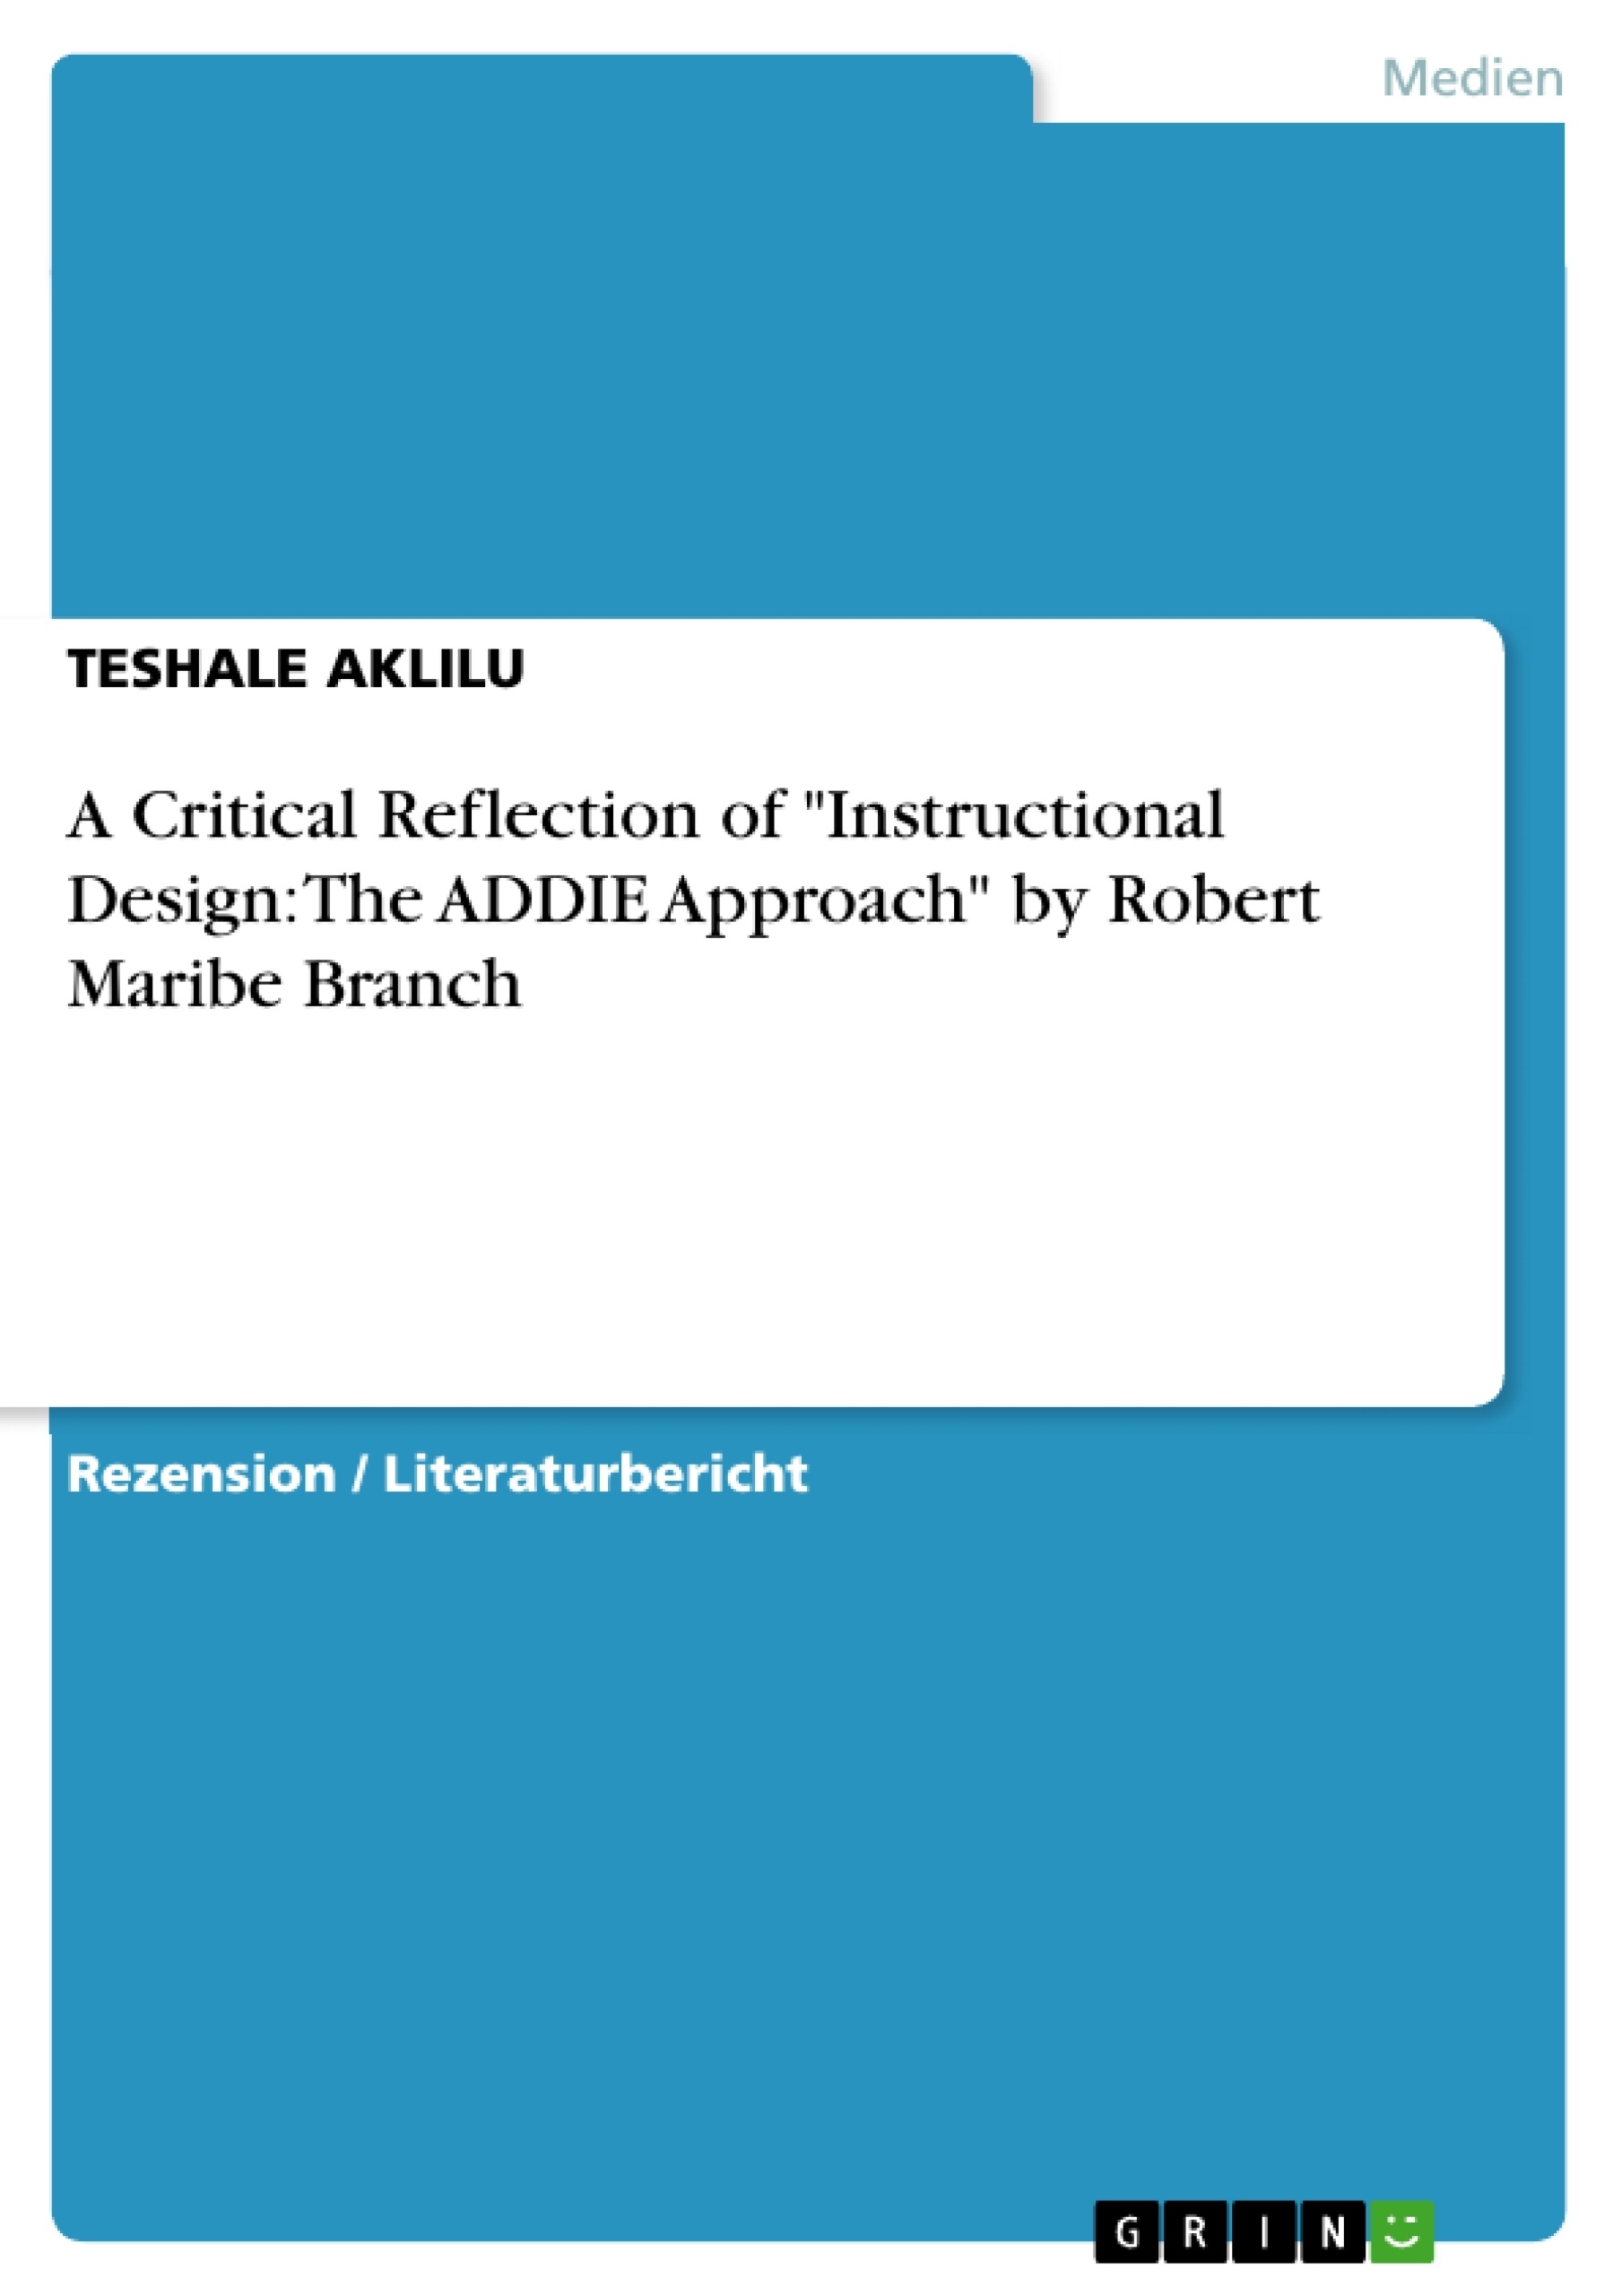 Titel: A Critical Reflection of "Instructional Design: The ADDIE Approach" by Robert Maribe Branch